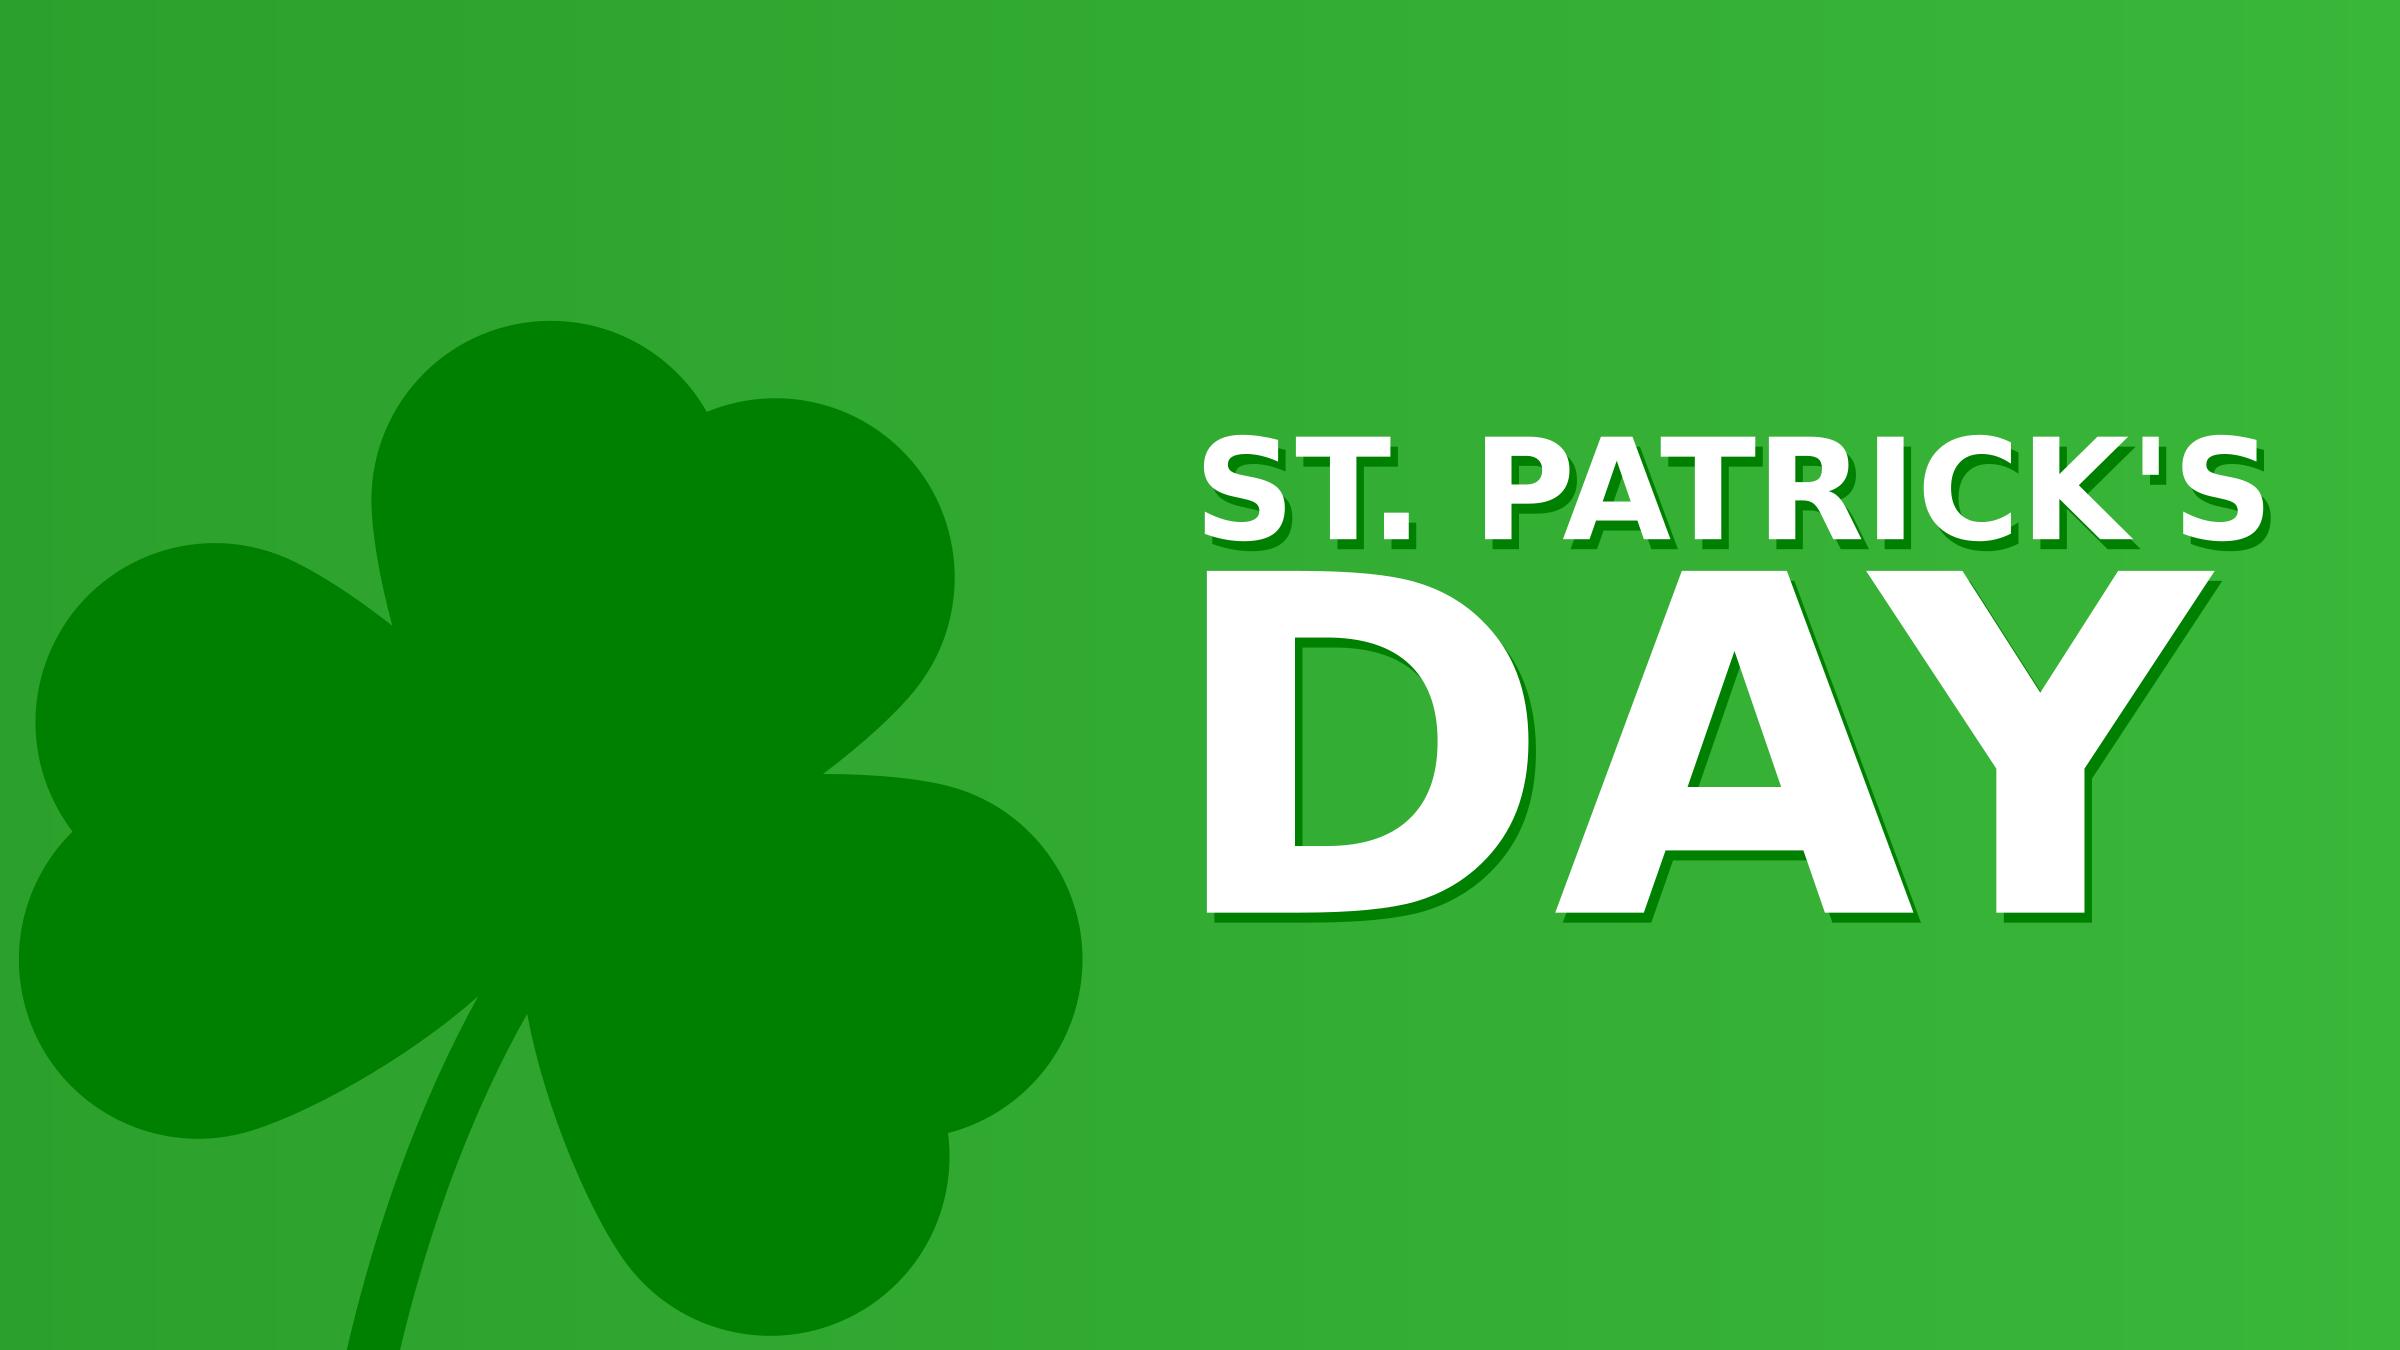 St. Patrick's Day Minimalist Featured Image 16:9 png